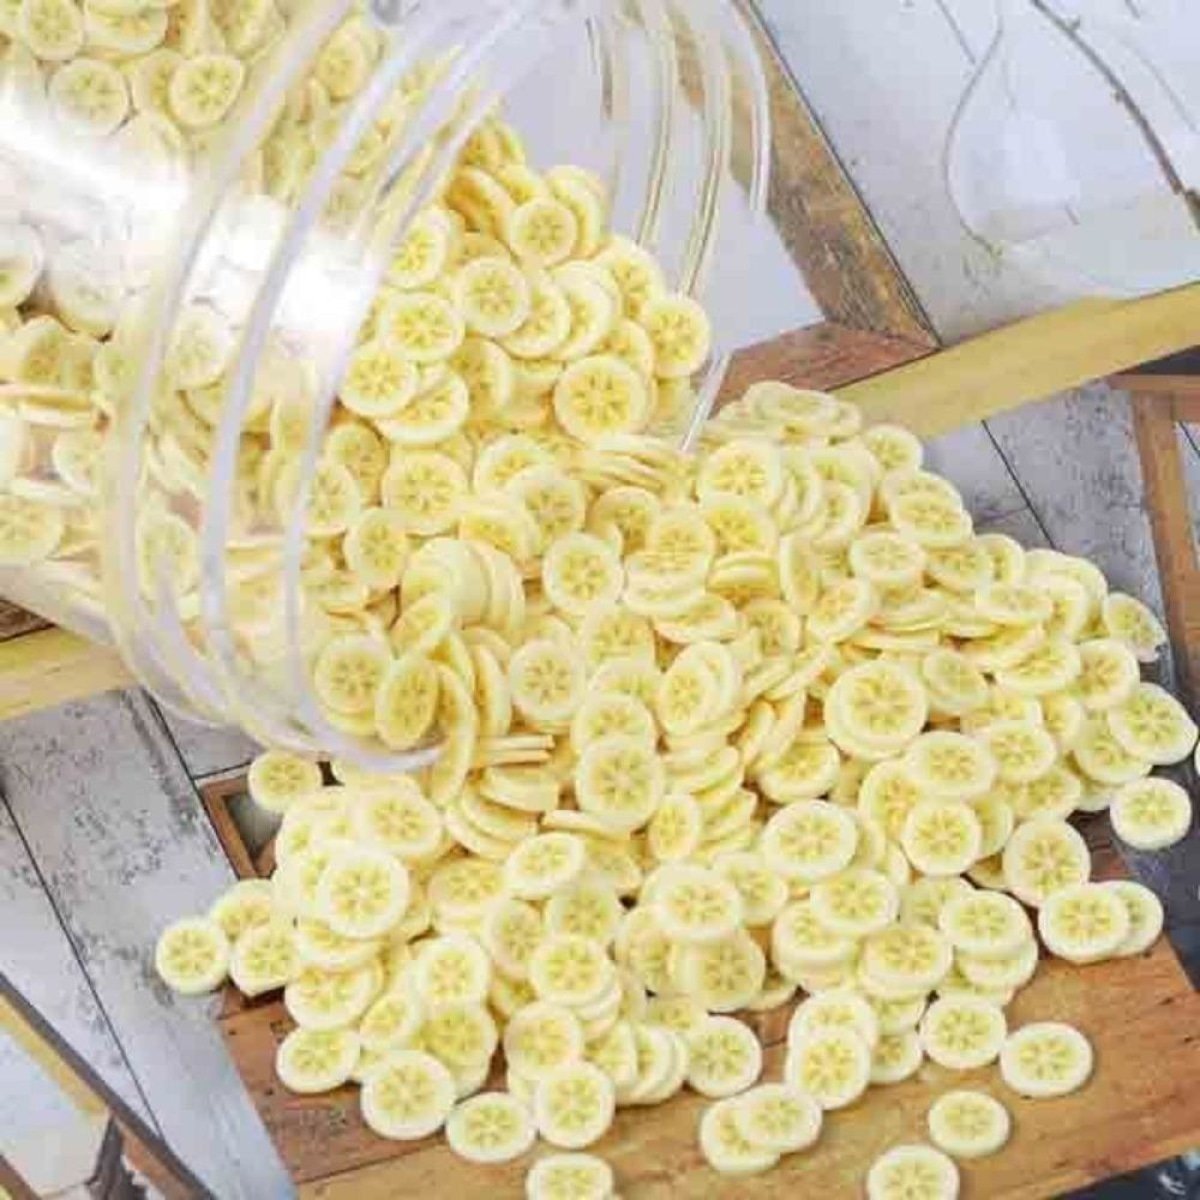 1000pcs Fruit Slice Nail Art Slices Charms 10g Decorations - Bananas - - Asia Sell